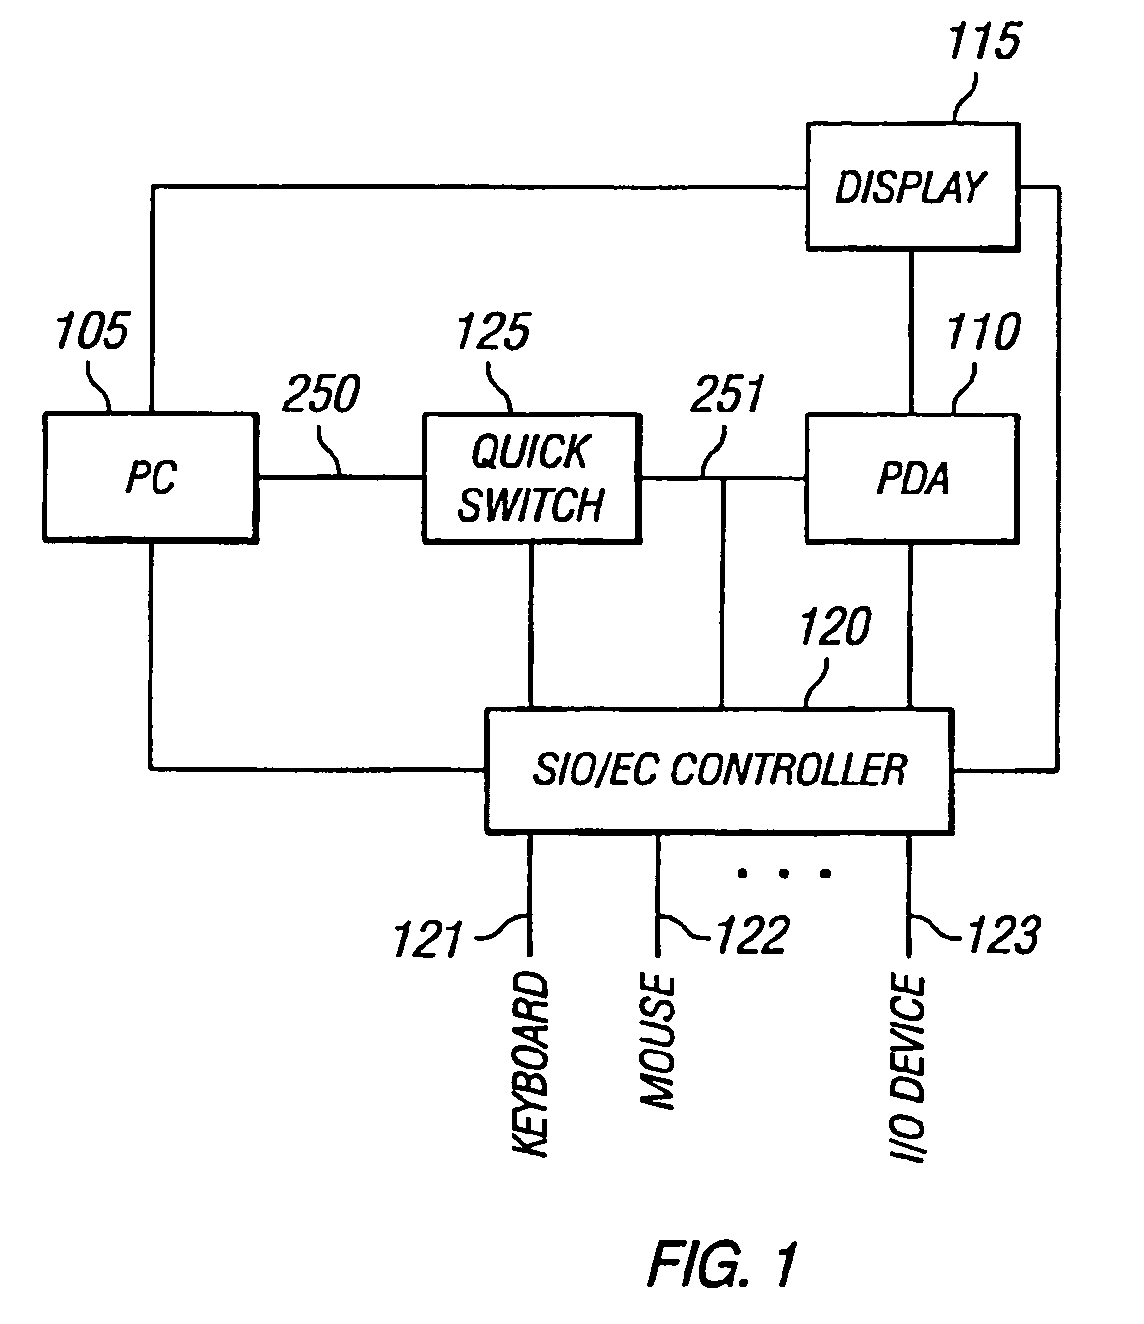 Method of operating combination personal data assistant and personal computing device